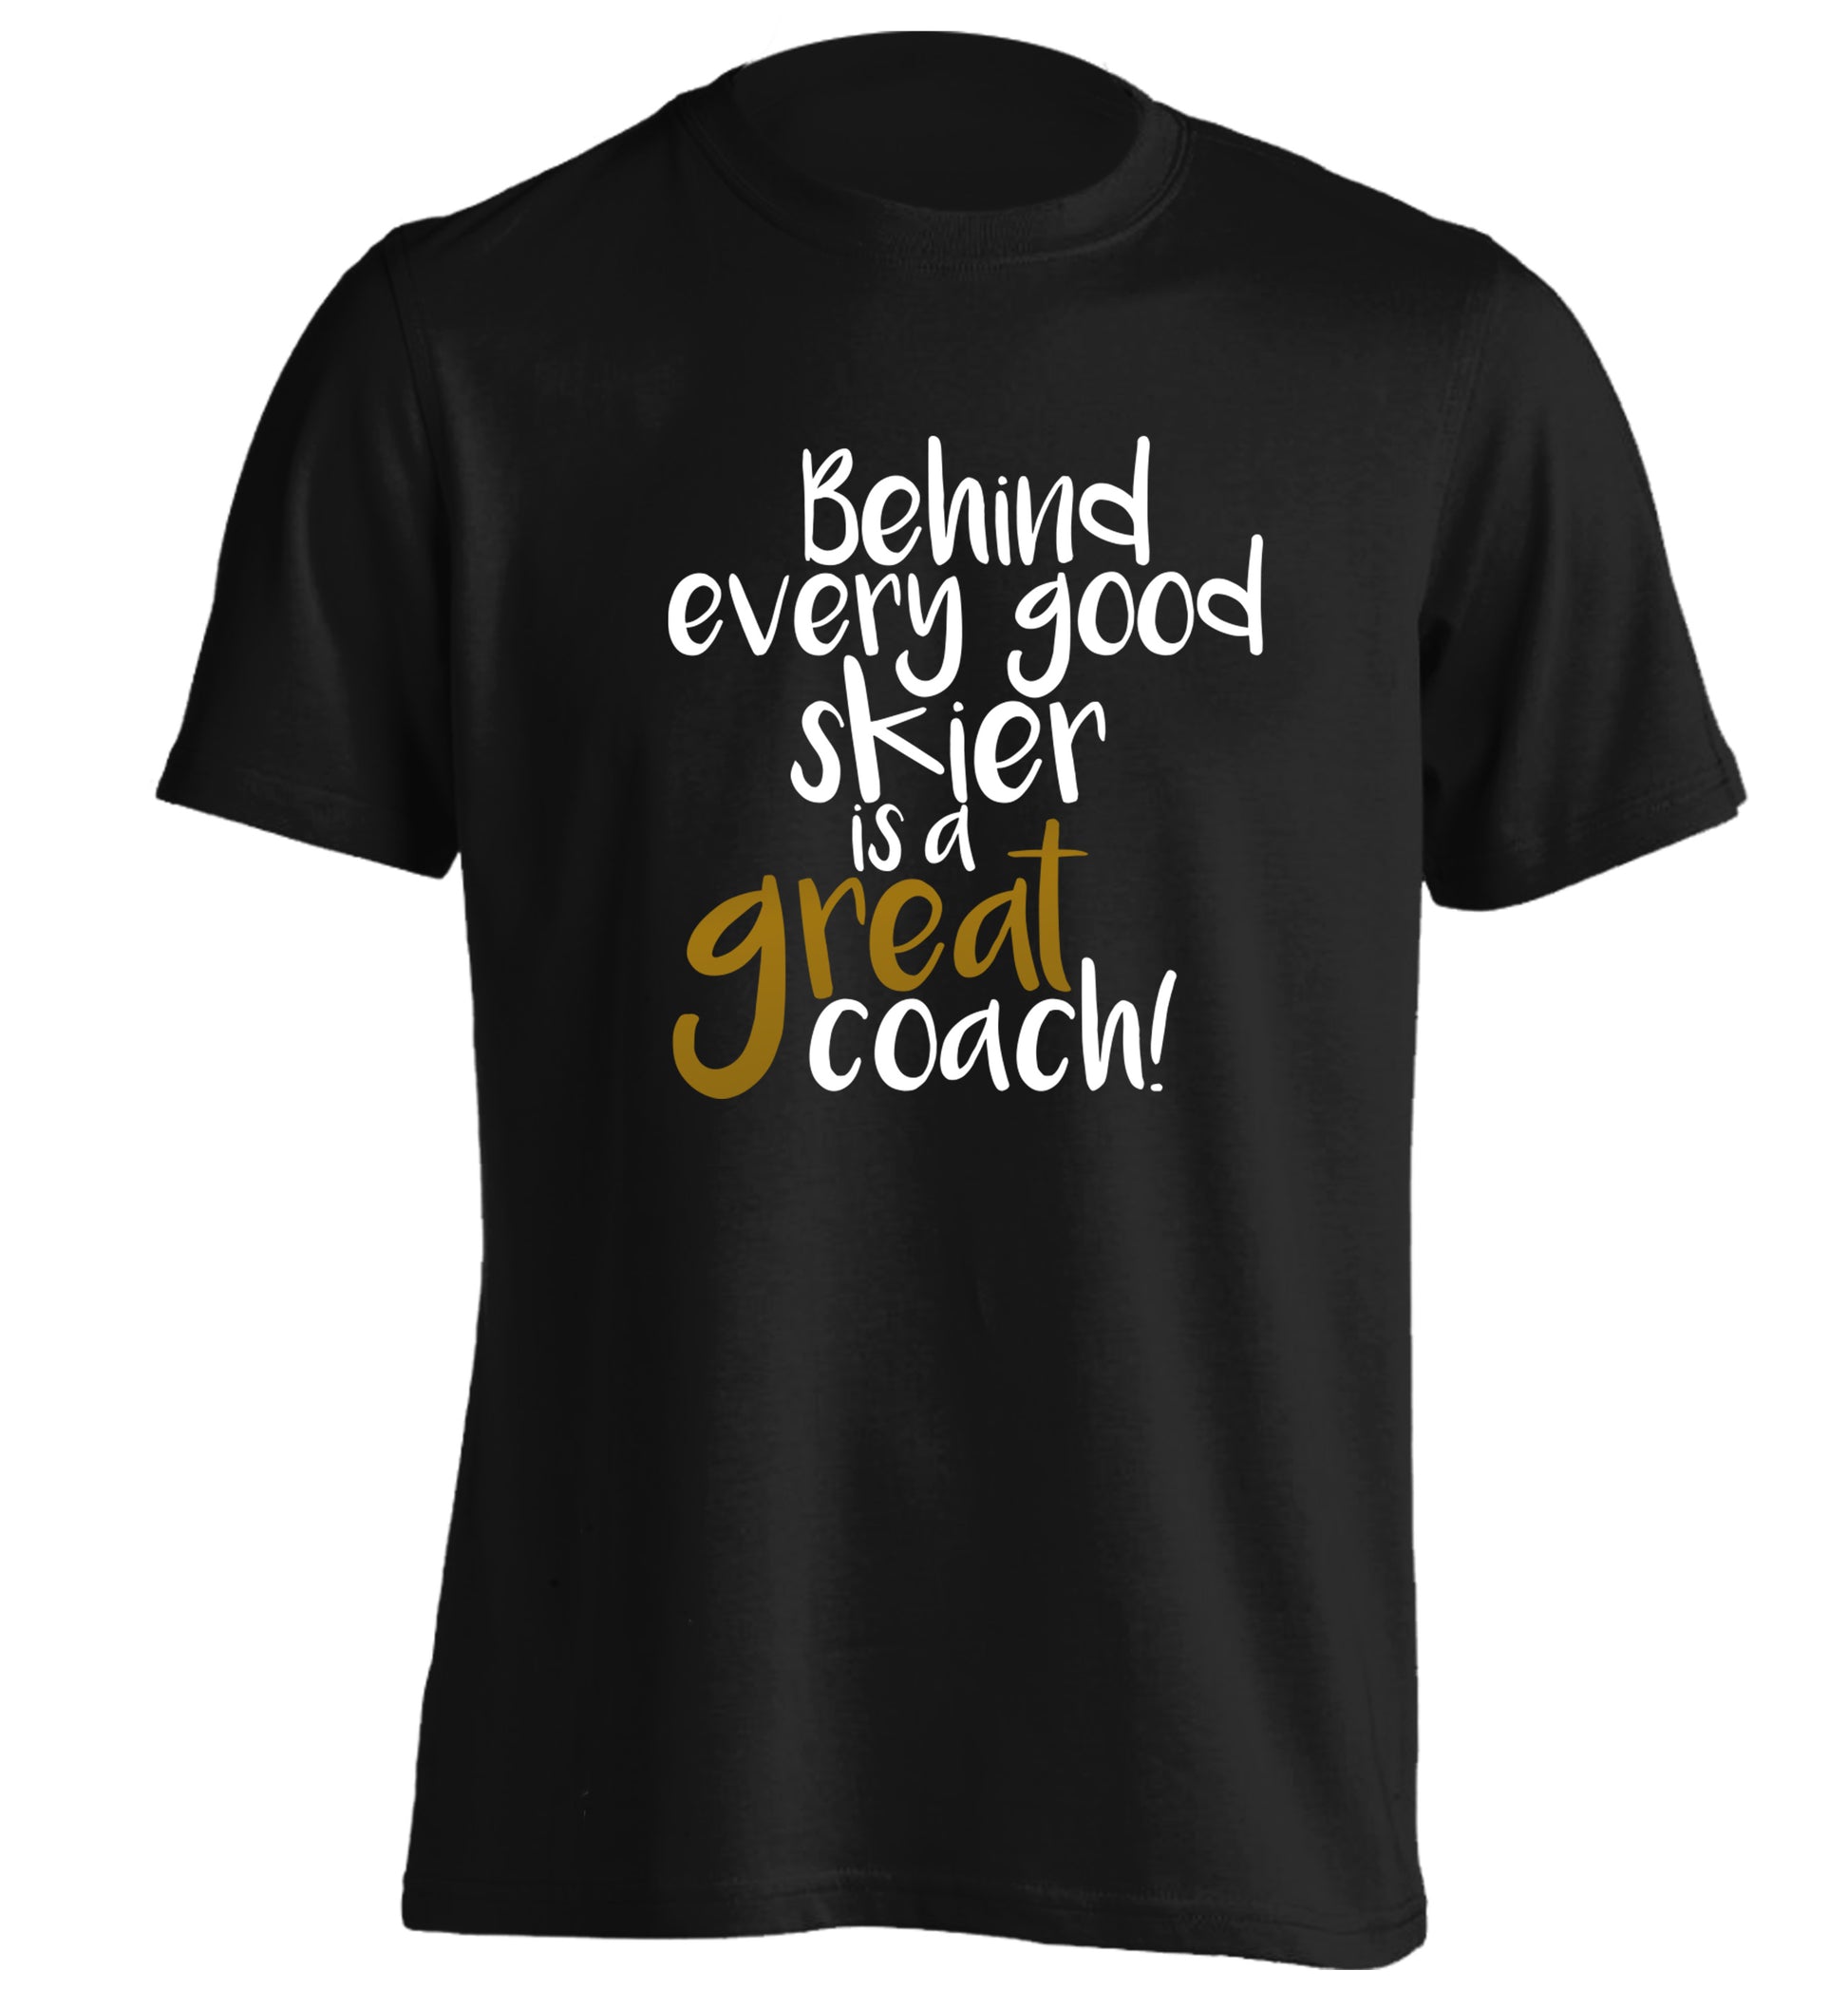 Behind every good skier is a great coach! adults unisexblack Tshirt 2XL